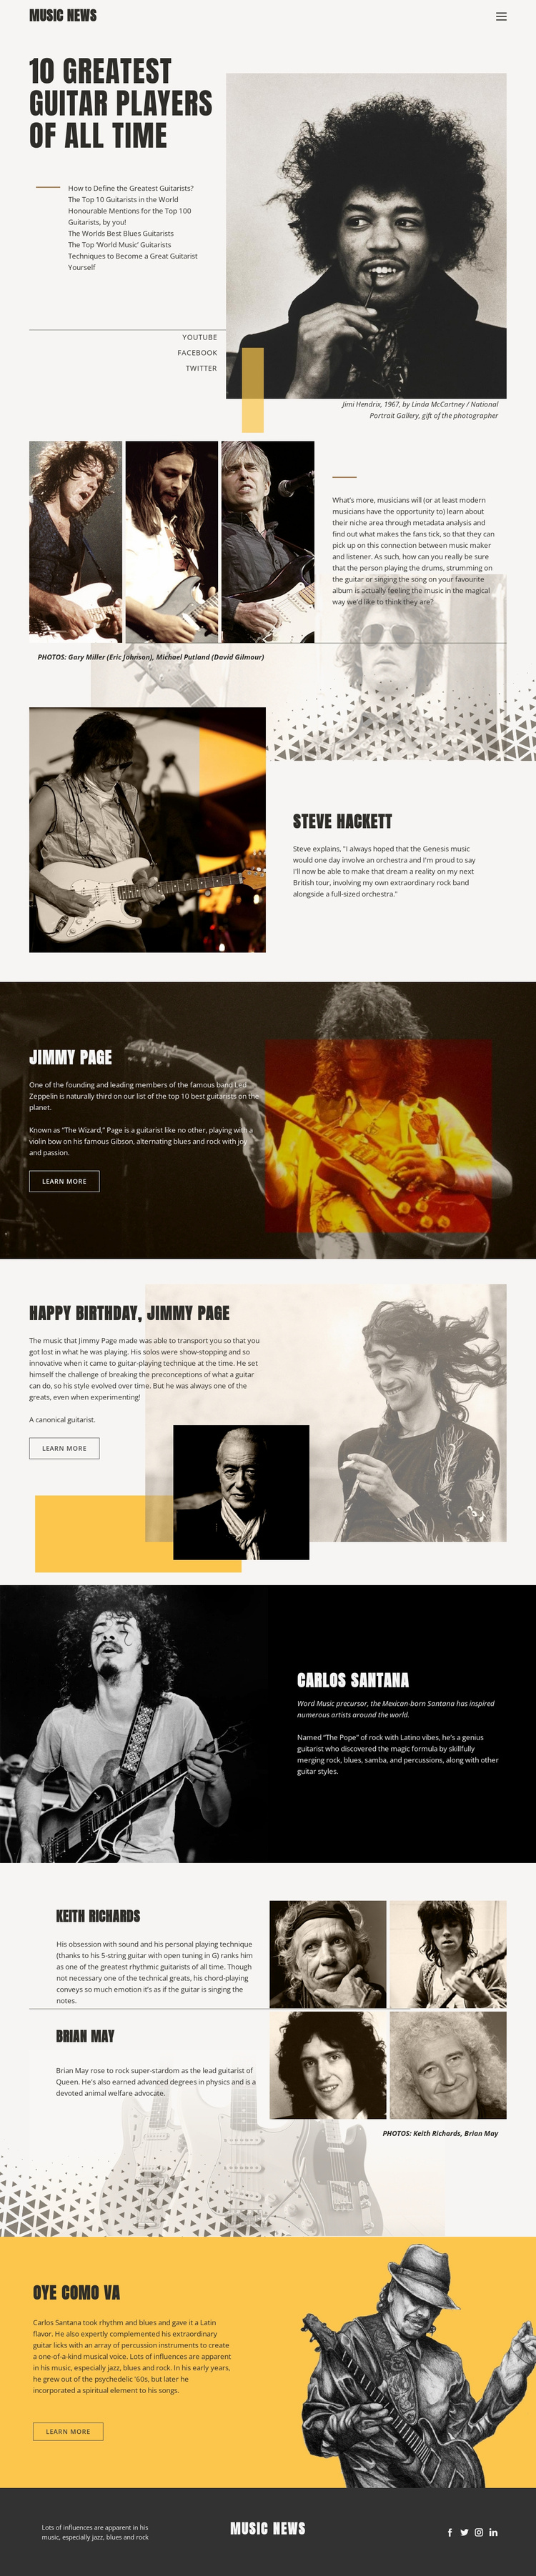 The Top Guitar Players Website Template